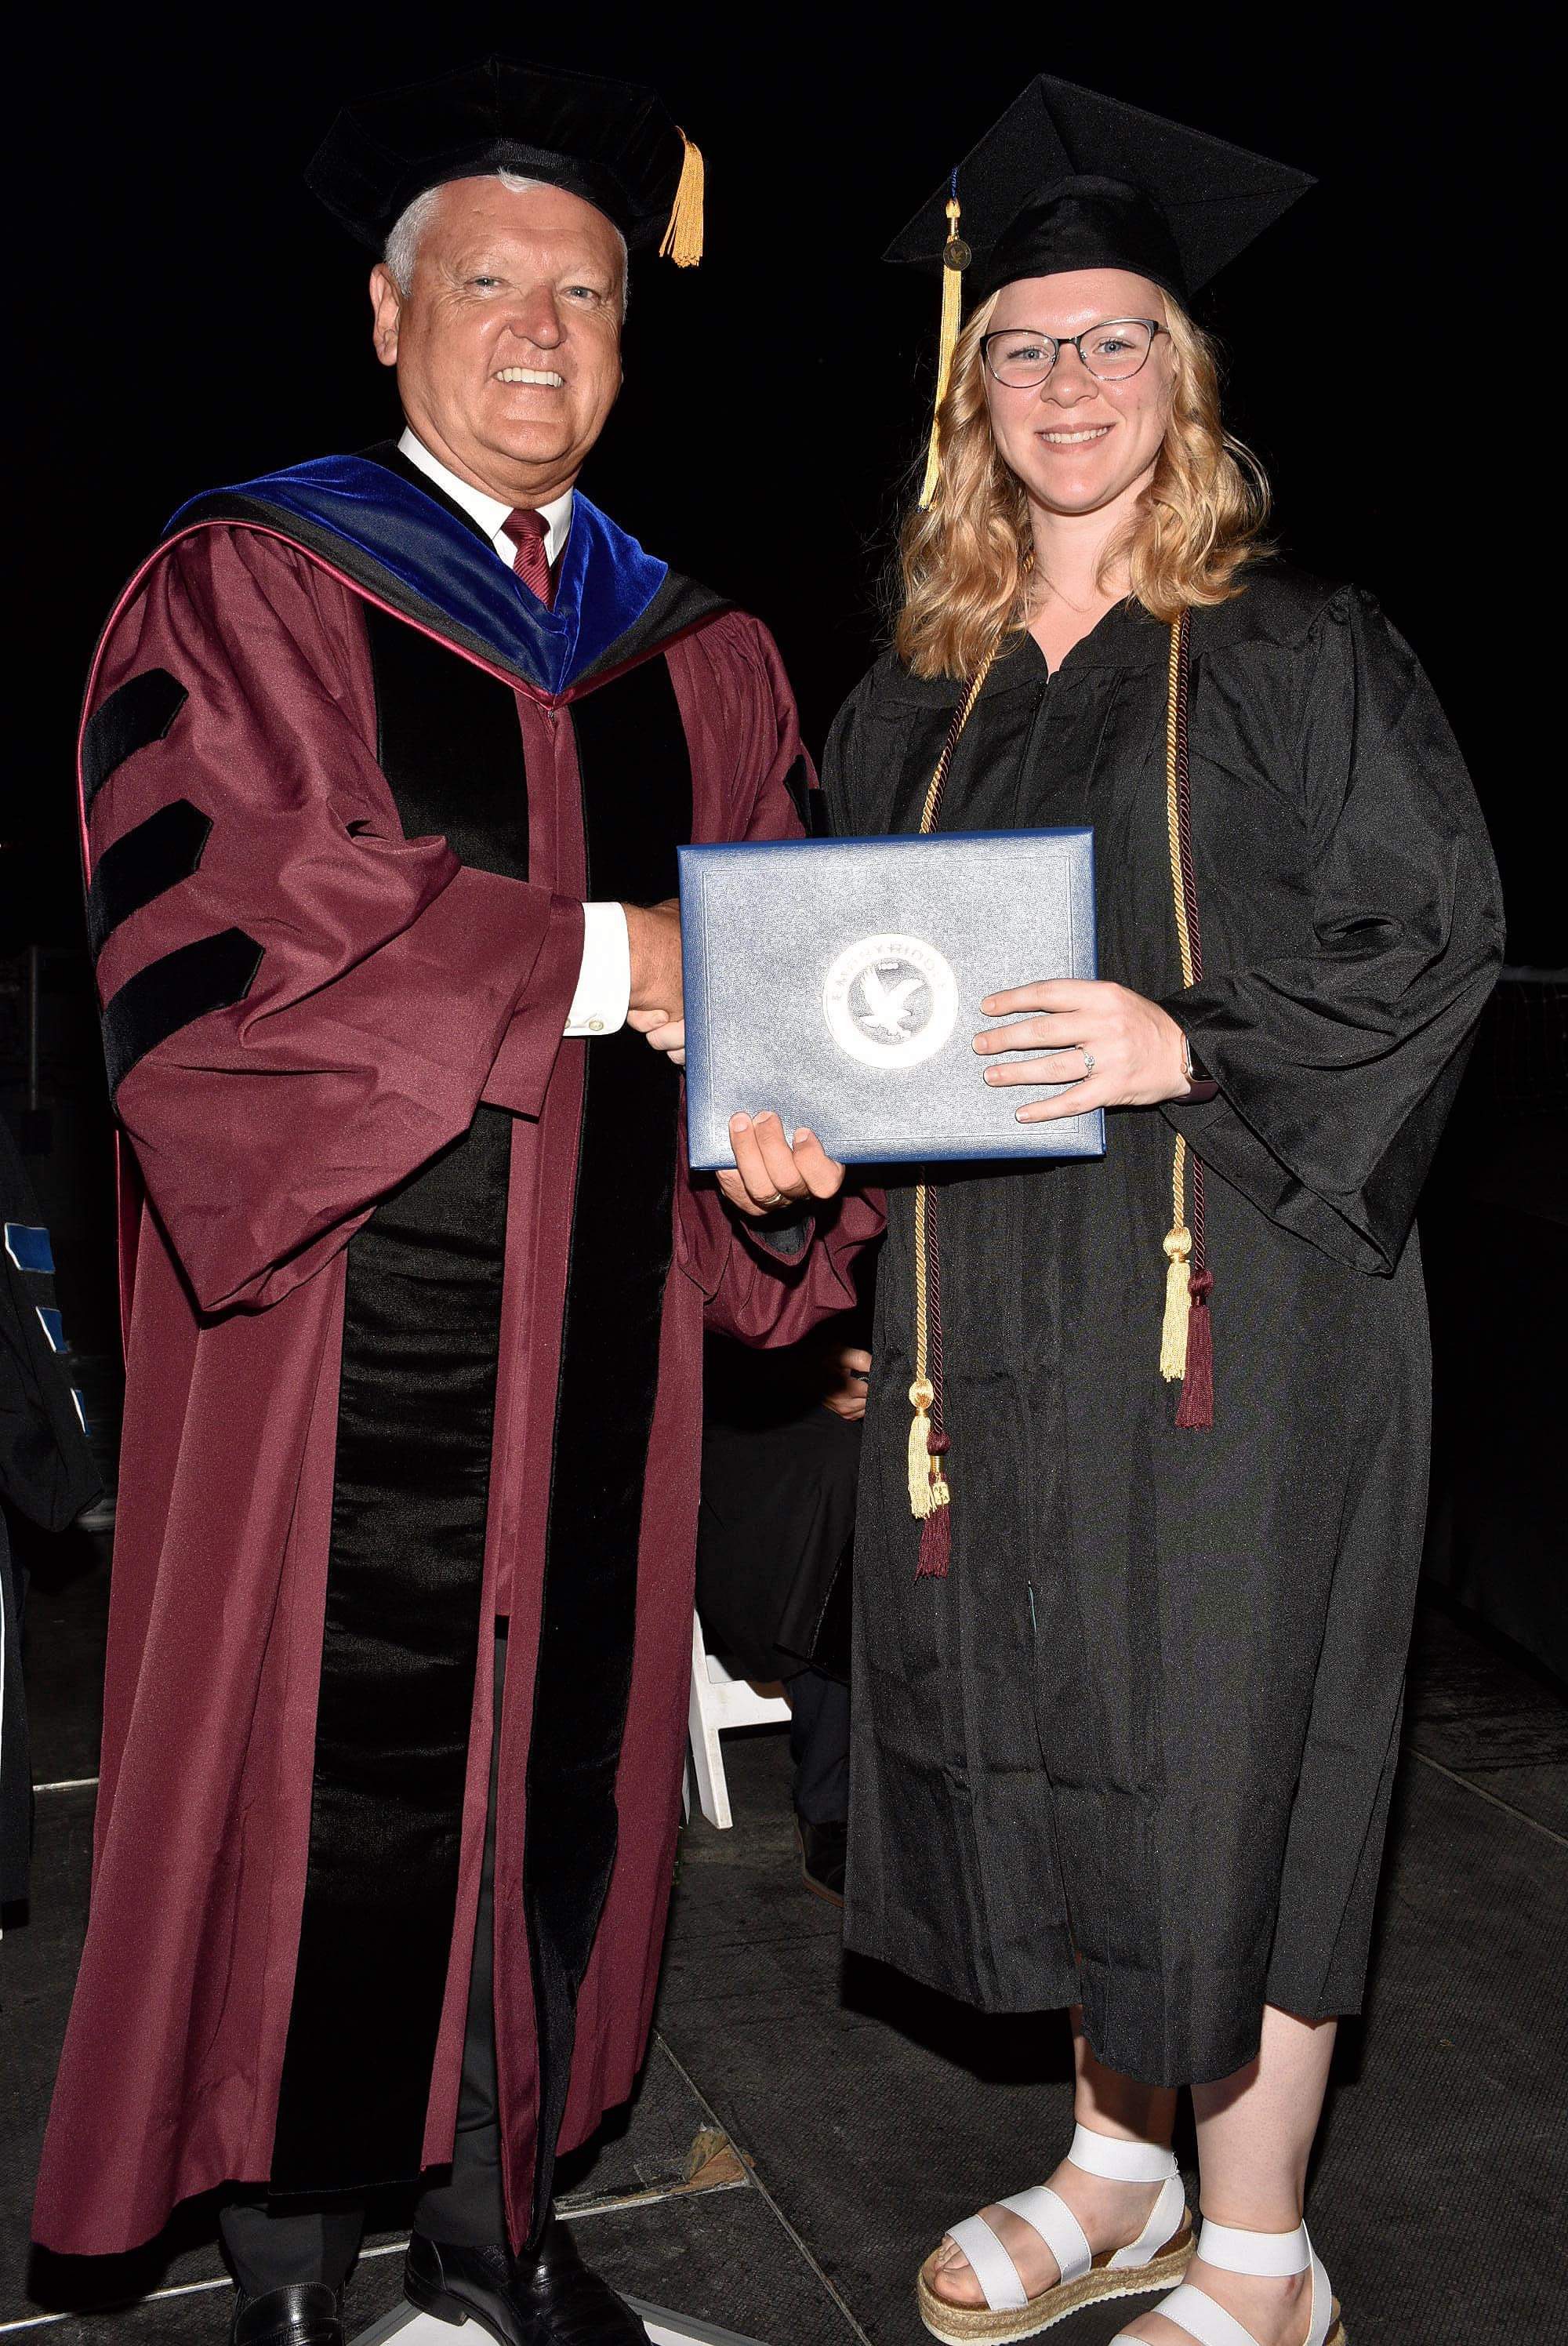 Ayesha Ward proudly accepts her A.S. in Aviation Business Administration from Worldwide Chancellor John R. Watret.